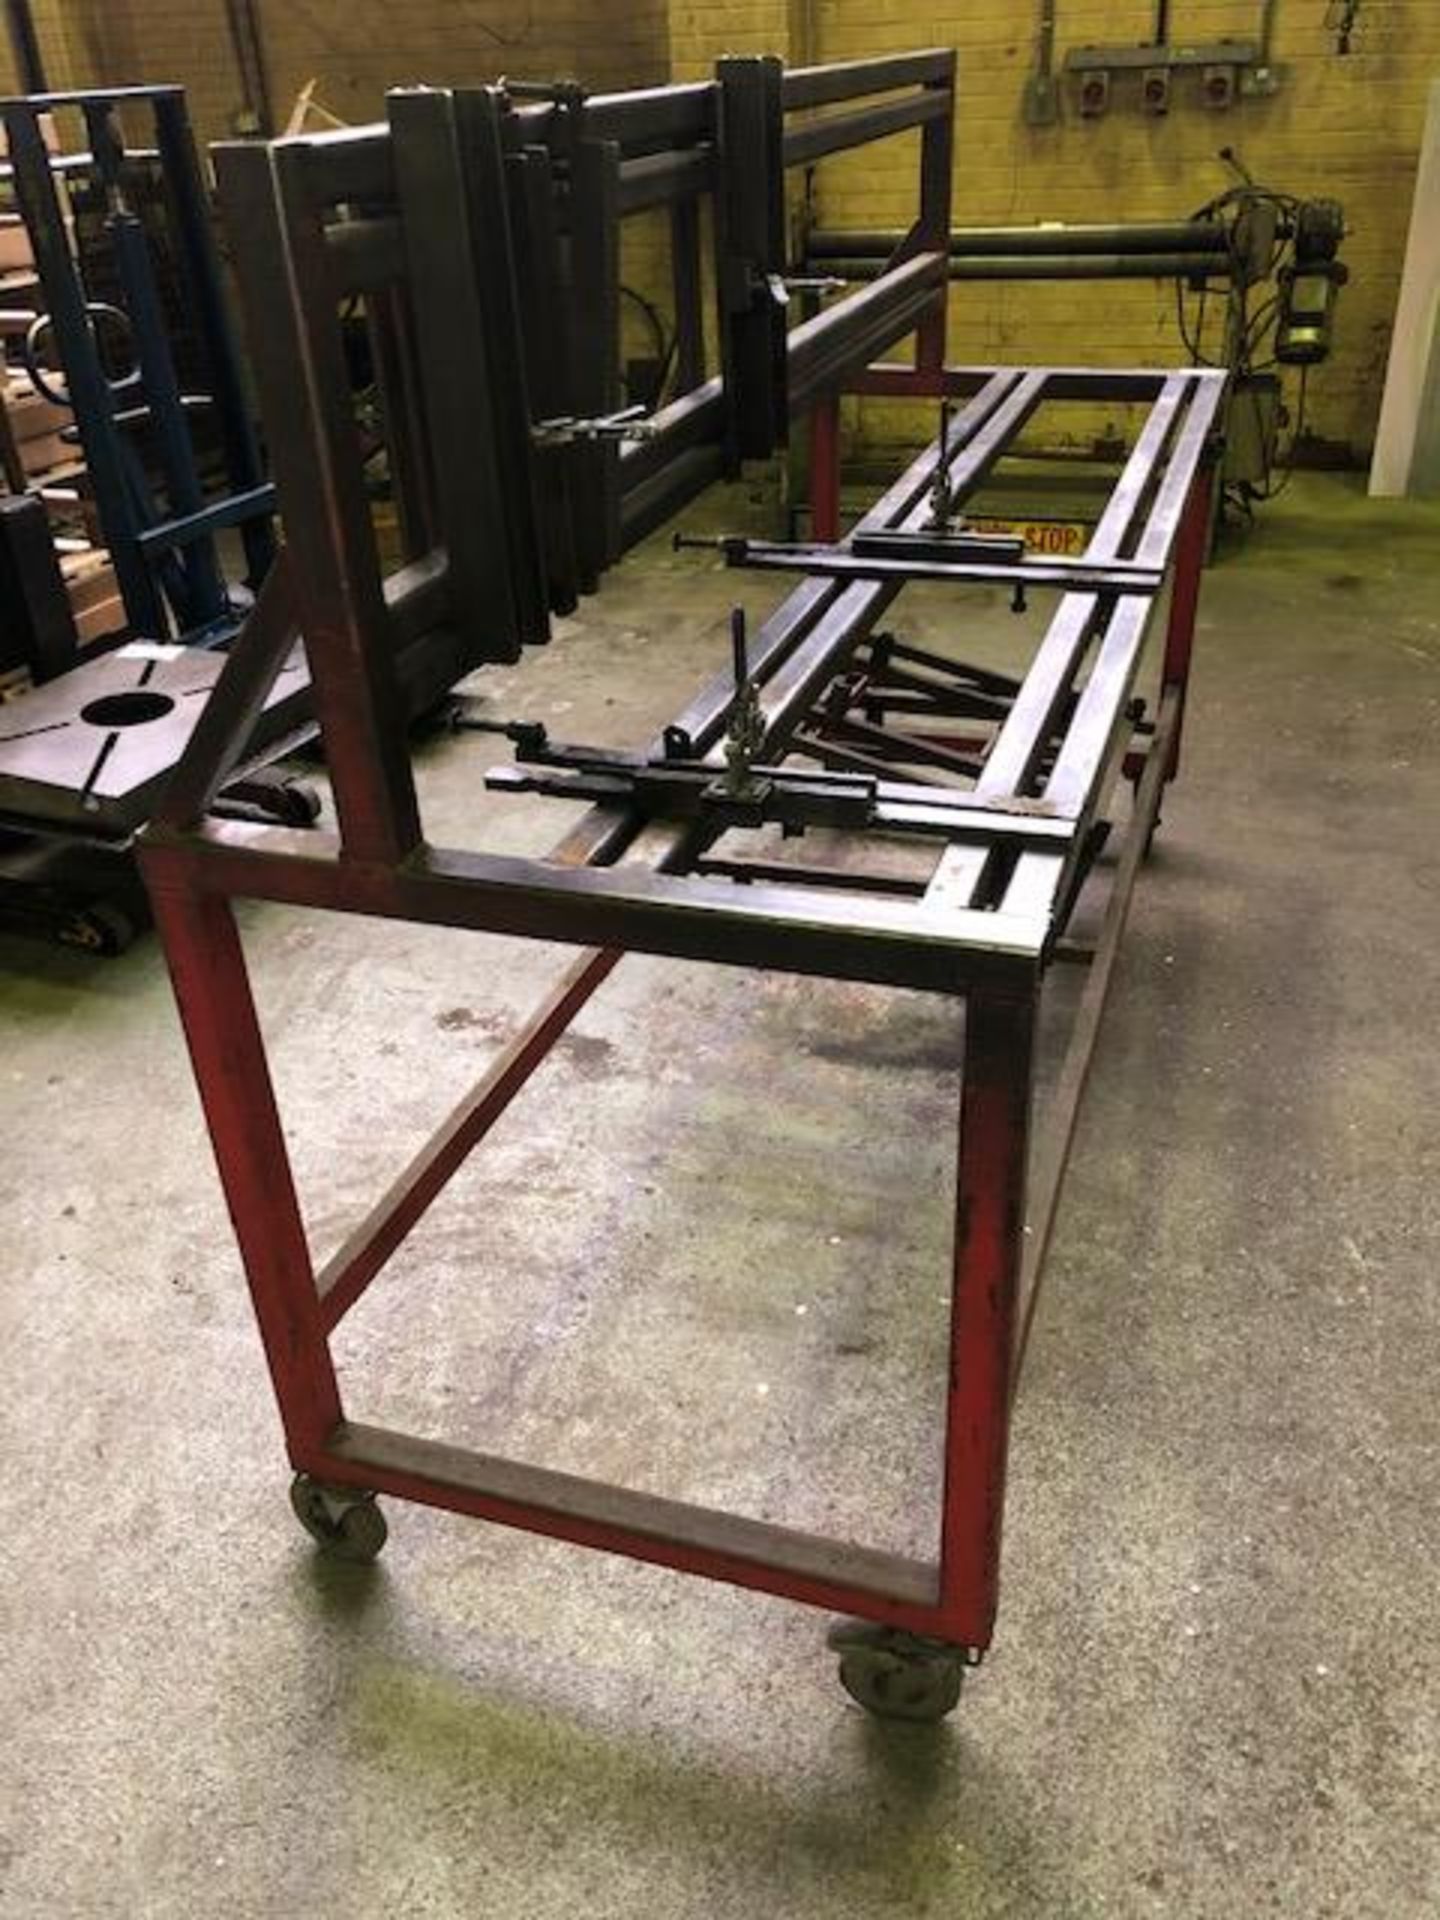 Steel fabricated mobile jig template on castor wheels - Image 3 of 3